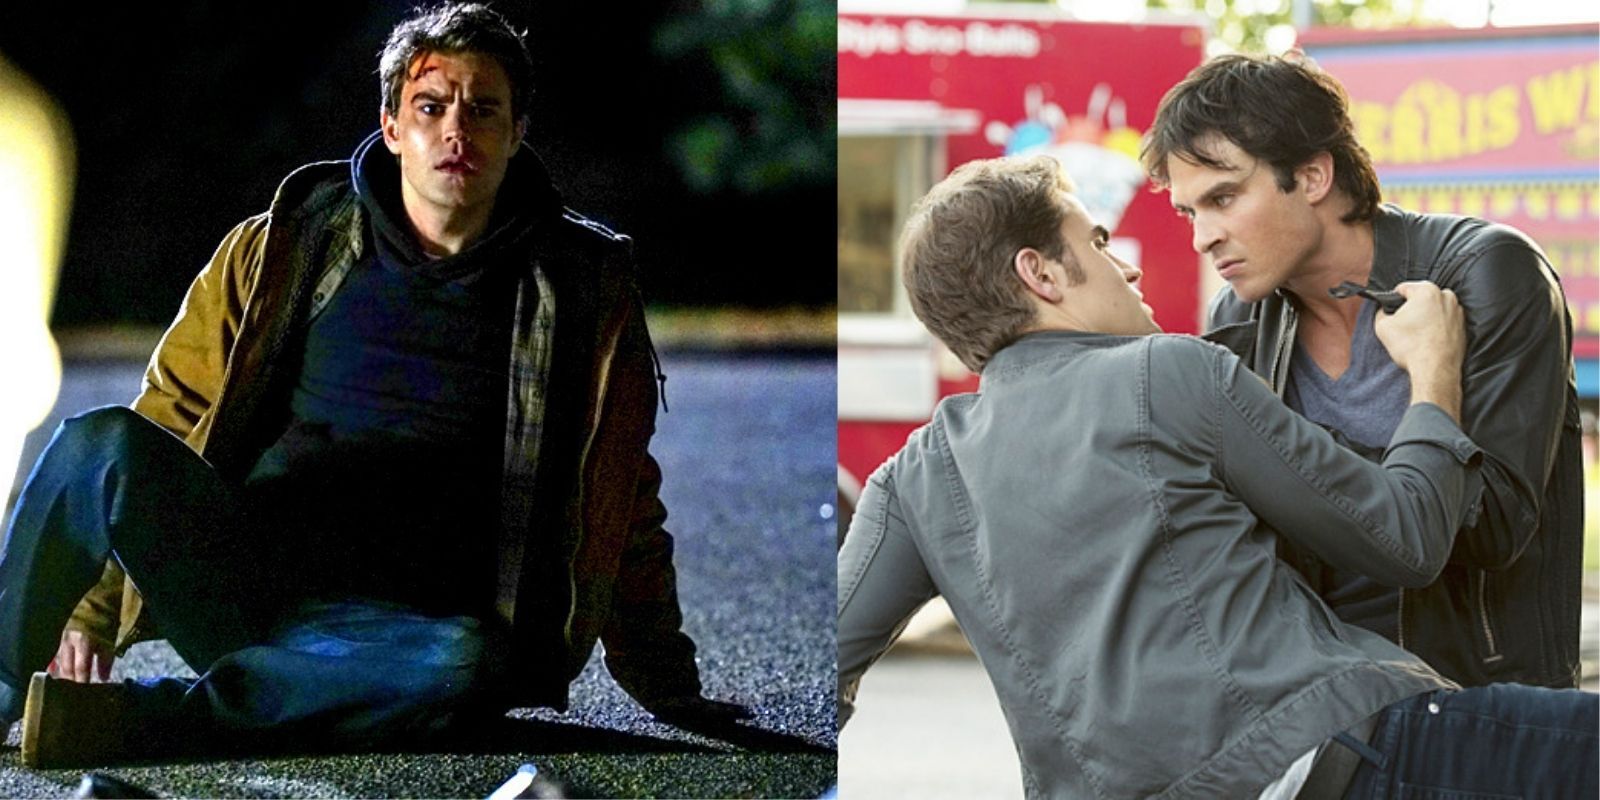 The Vampire Diaries: 10 Times Stefan Should Have Died & Only Survived Because Of Plot Armor